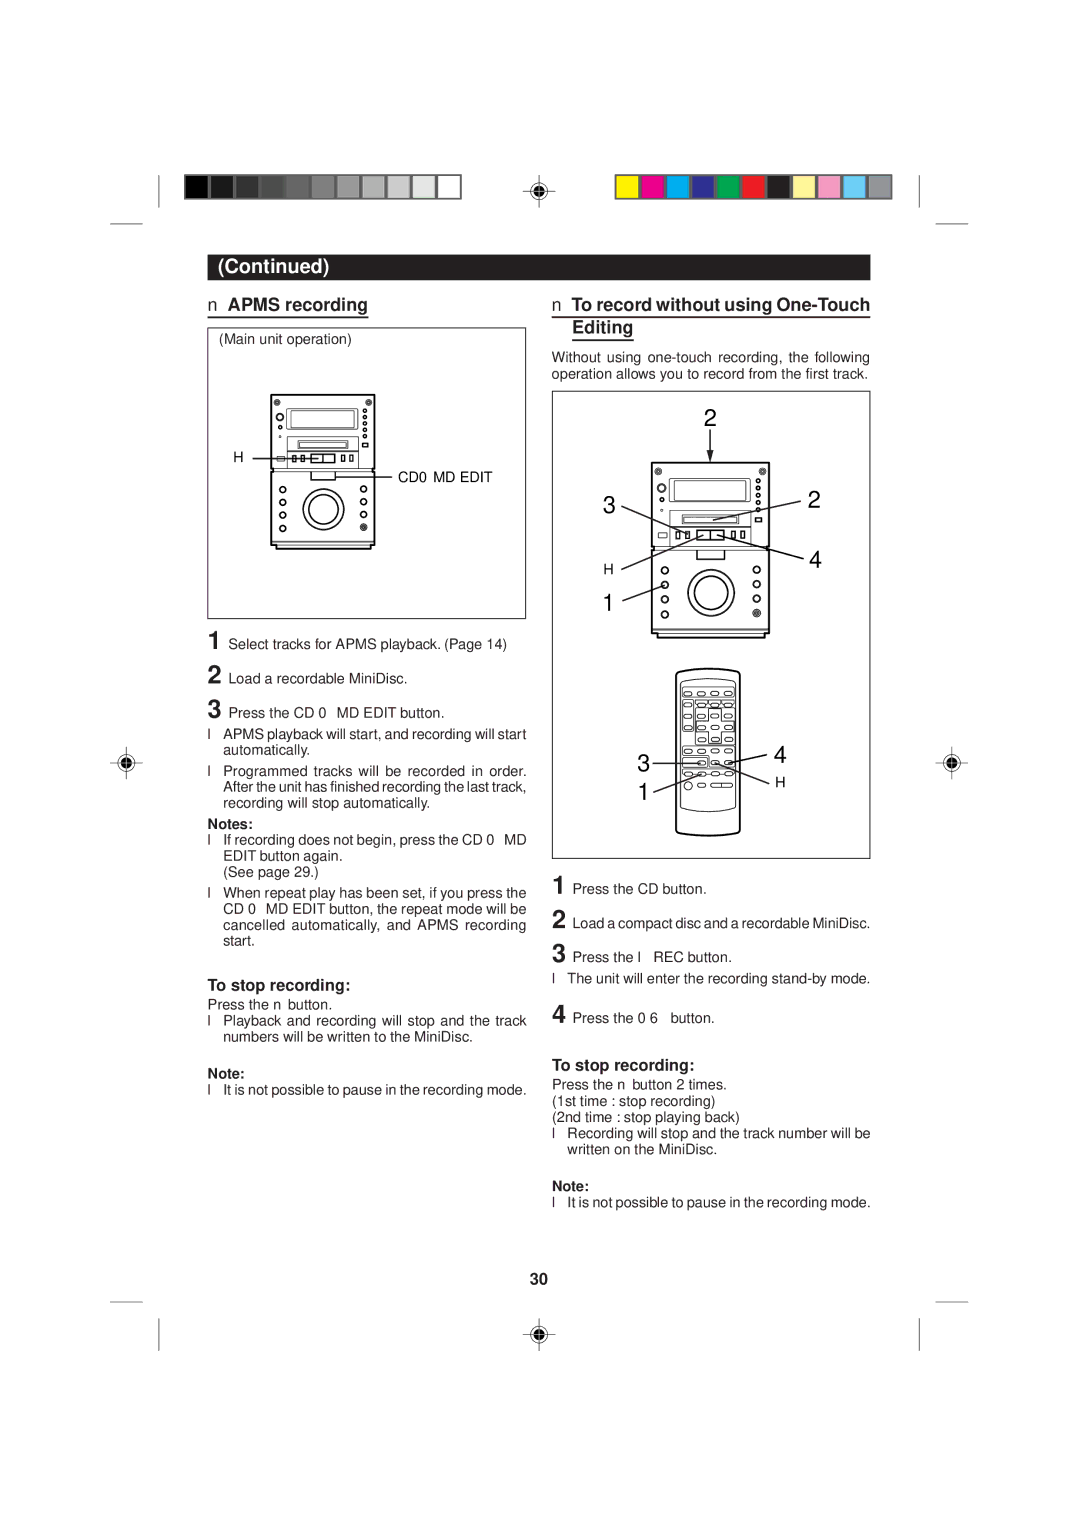 Sharp MD-M2H operation manual Apms recording, To record without using One-Touch Editing, CD0MD Edit 